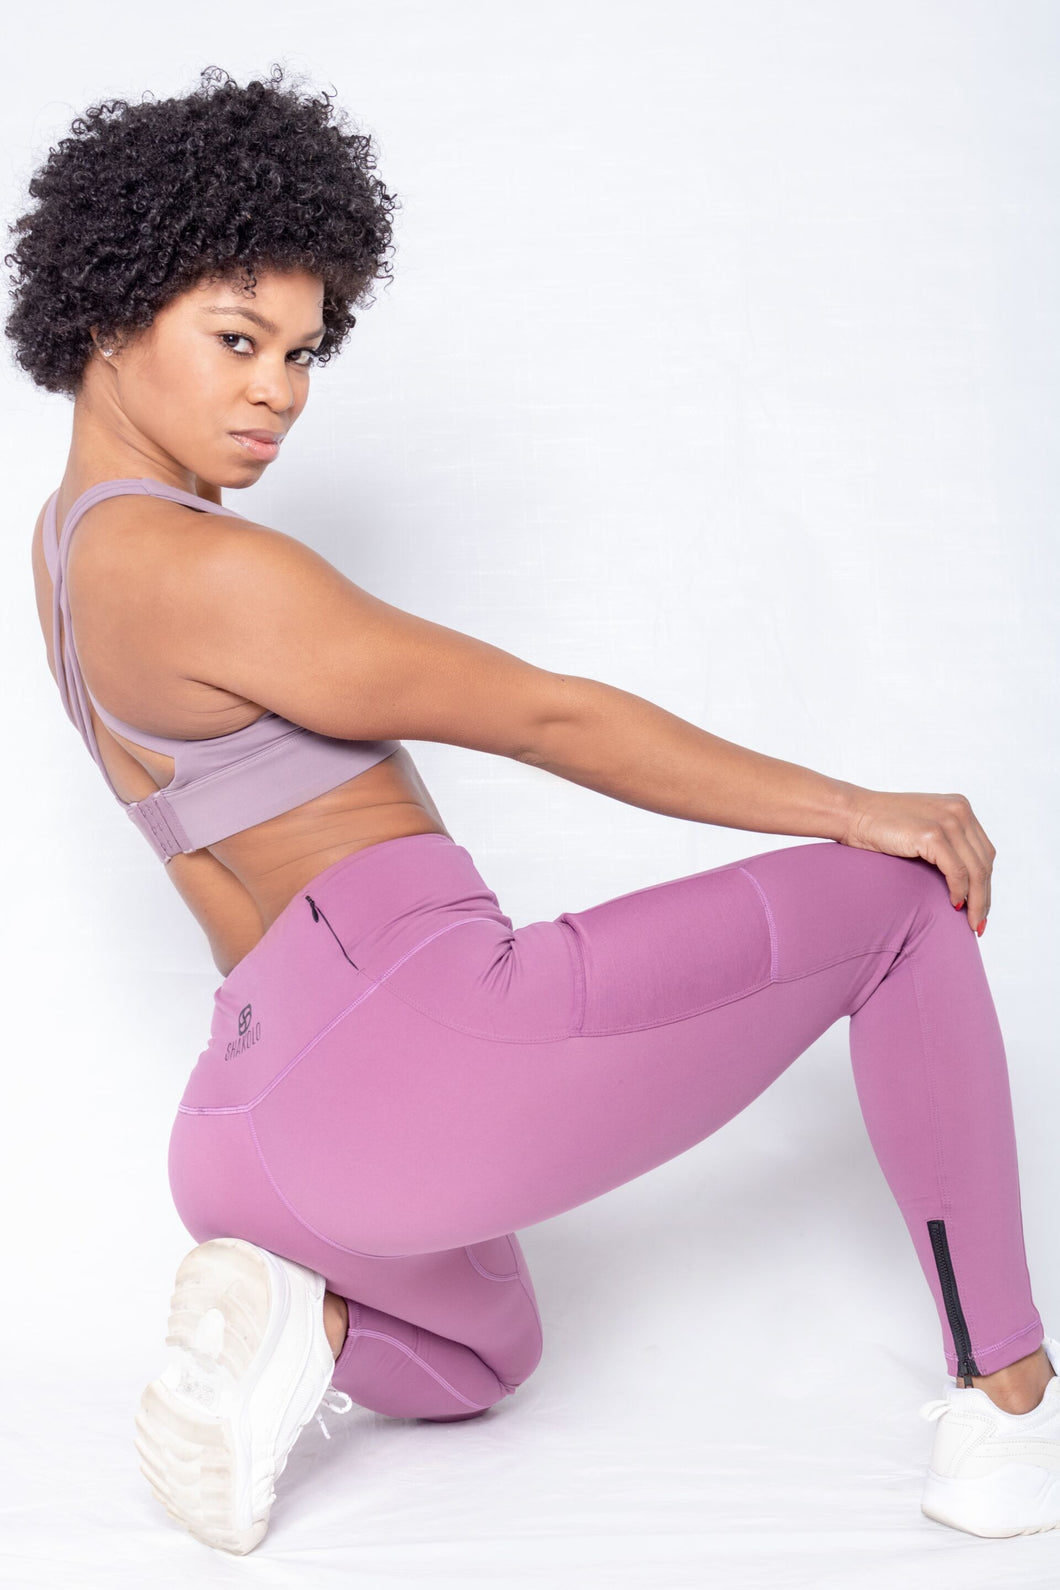 Shakolo adjustable strap bra in purple and high waist leggings in purple side view model with arm on bent leg